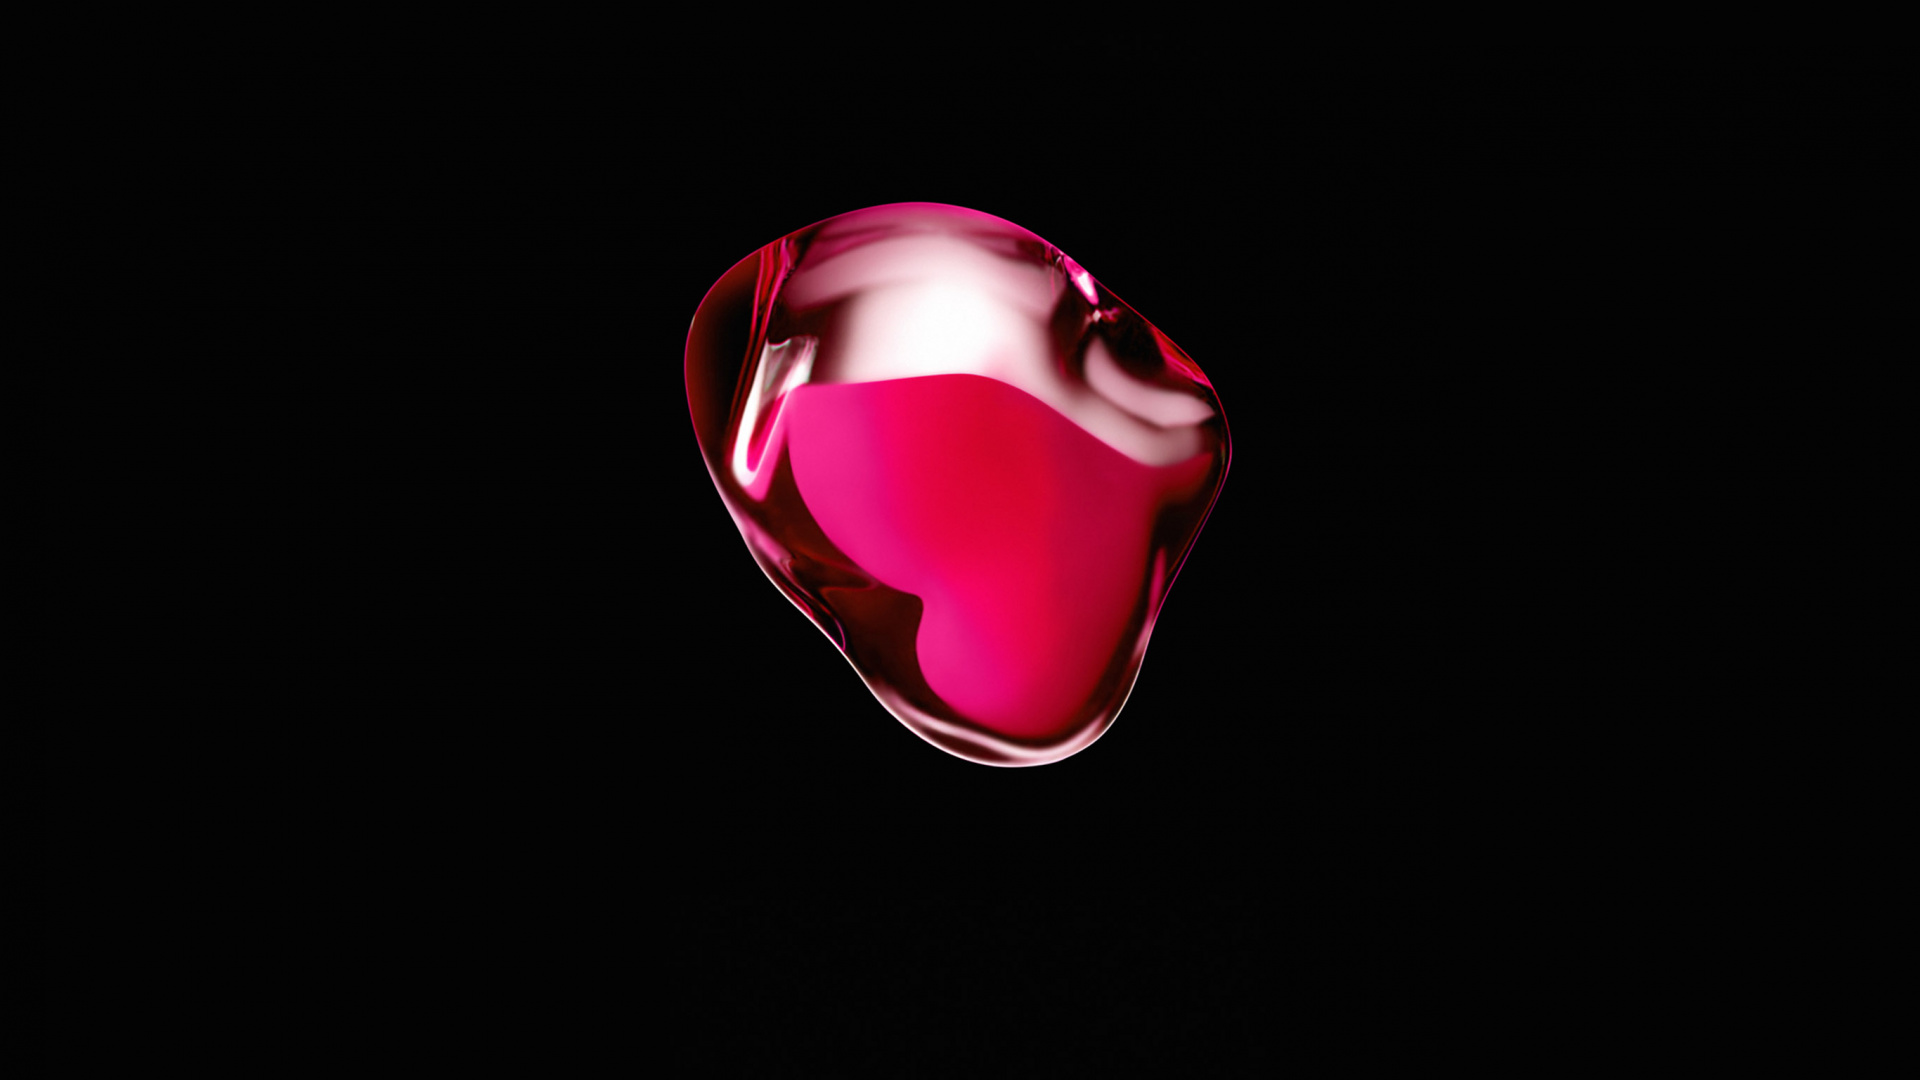 Pink and Silver Heart Ornament. Wallpaper in 1920x1080 Resolution